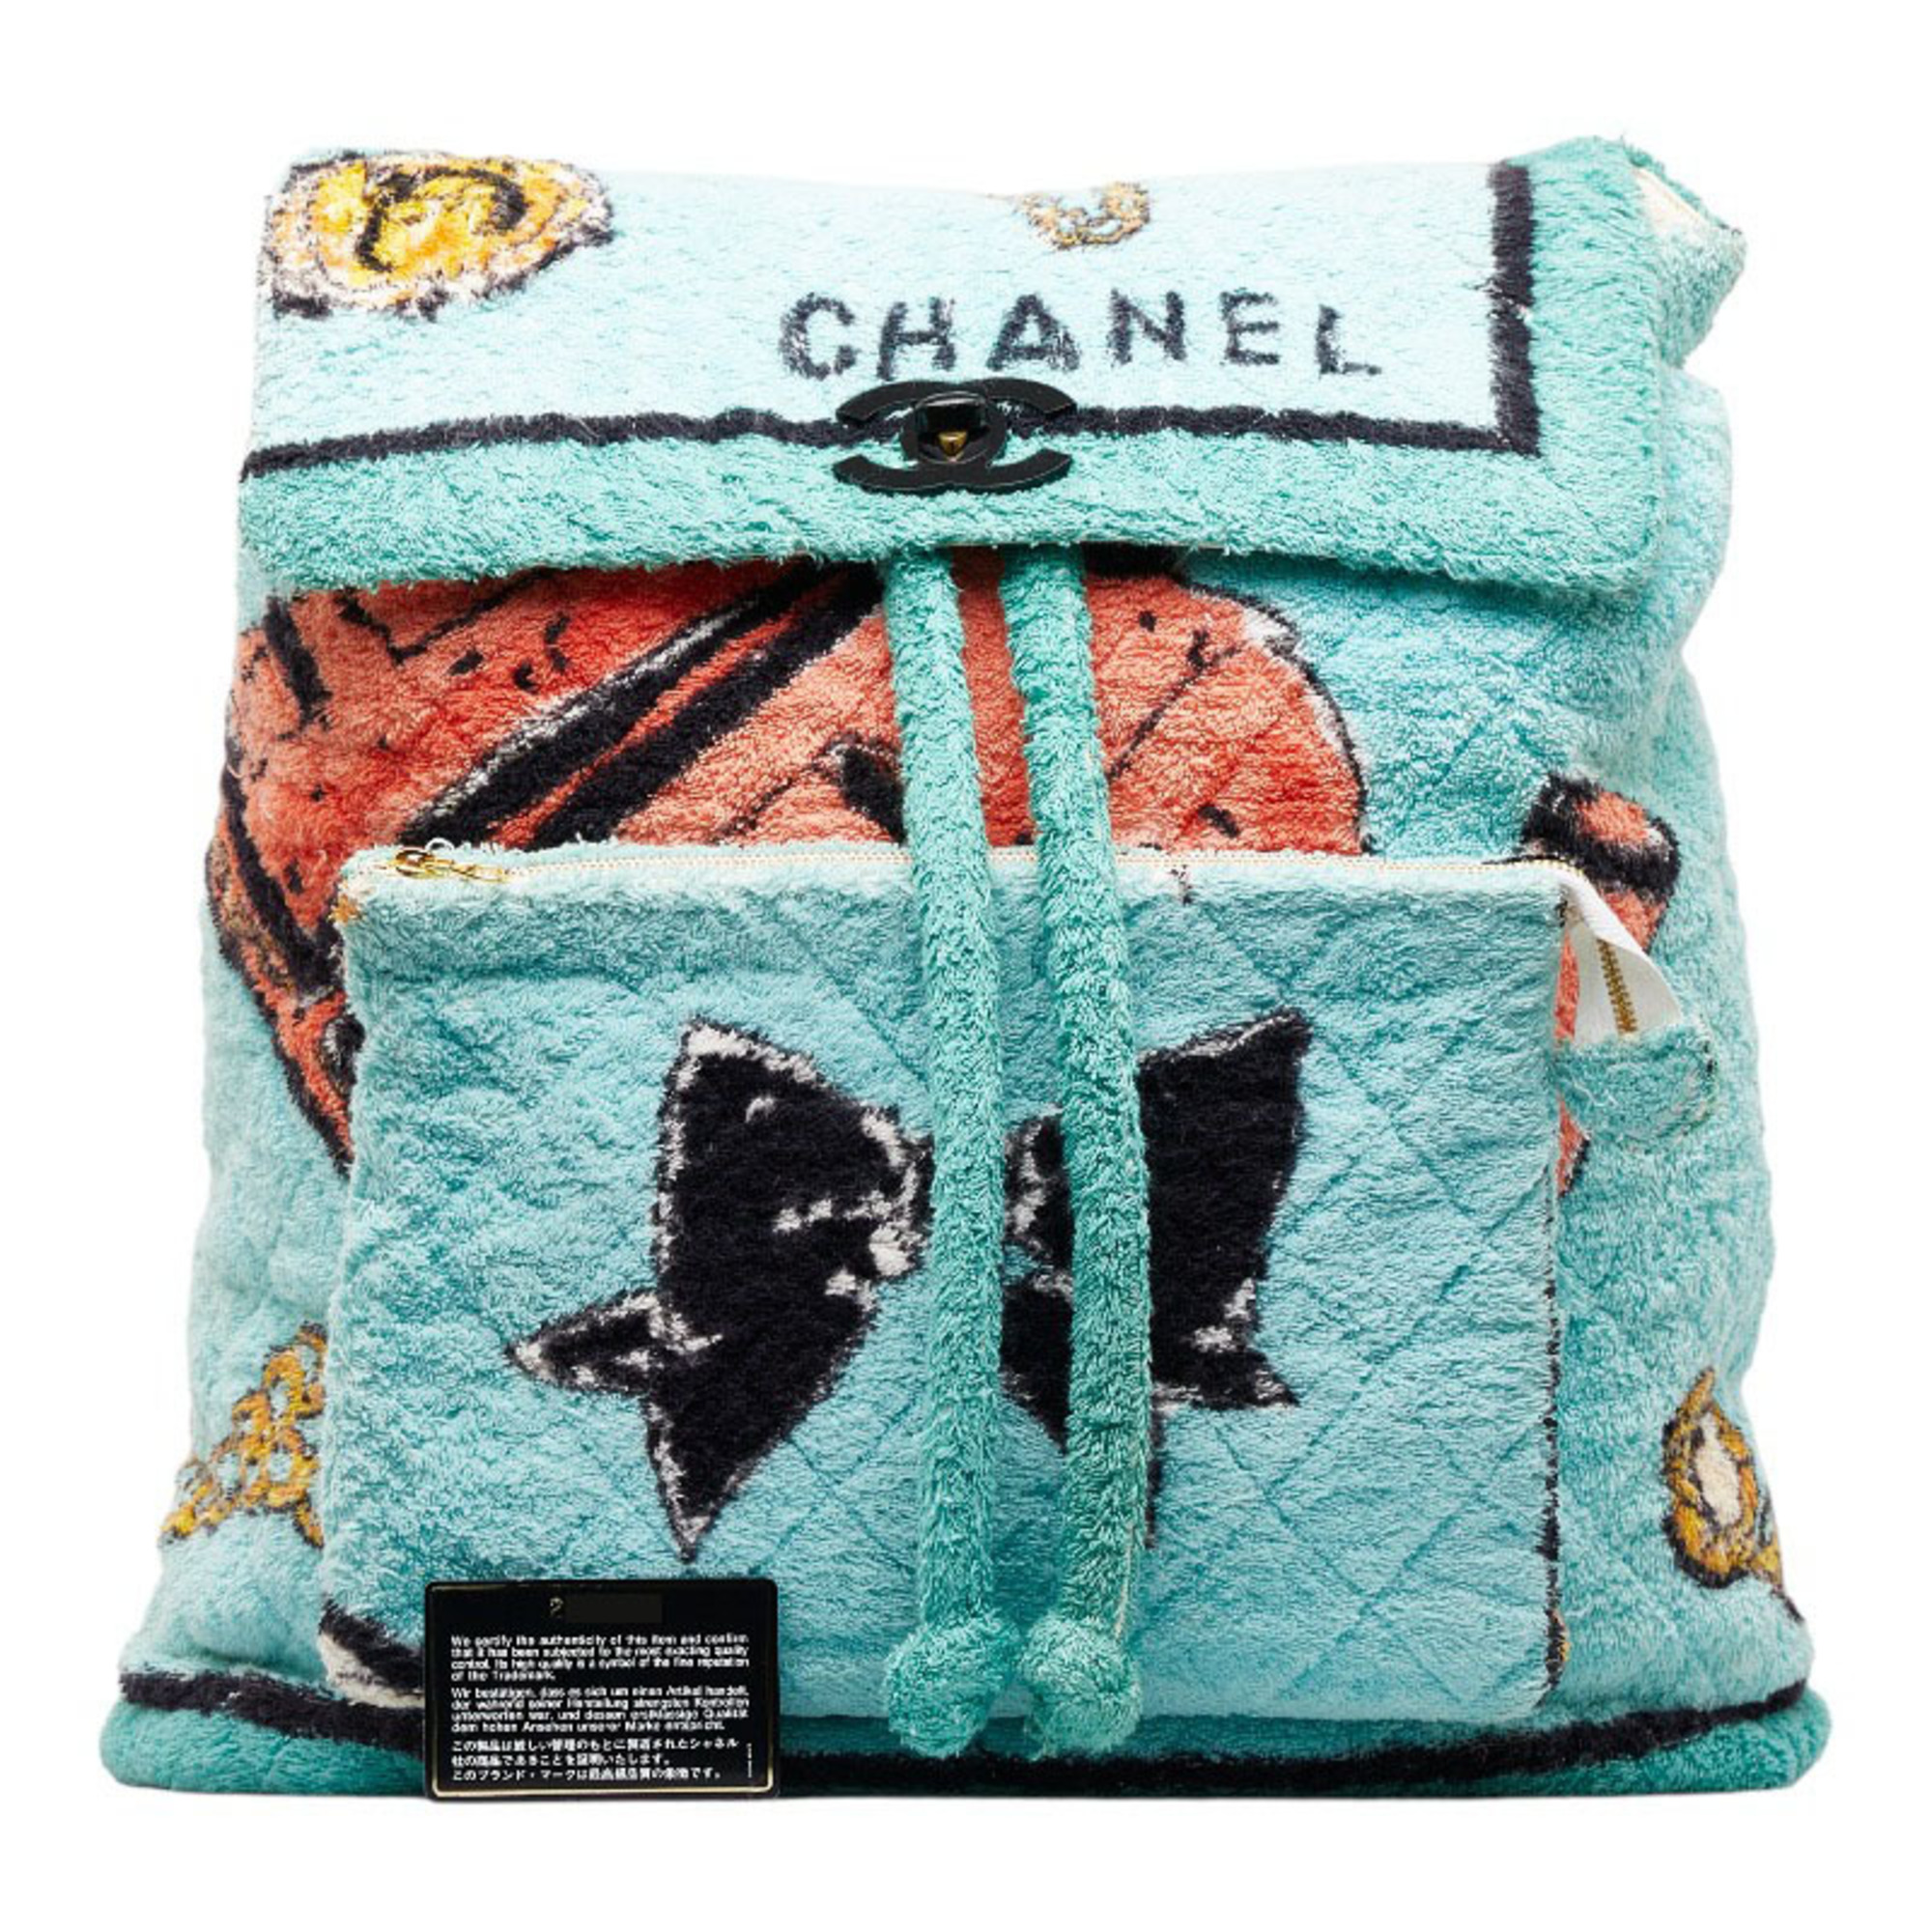 Chanel pile rucksack backpack green multicolor cotton ladies CHANEL